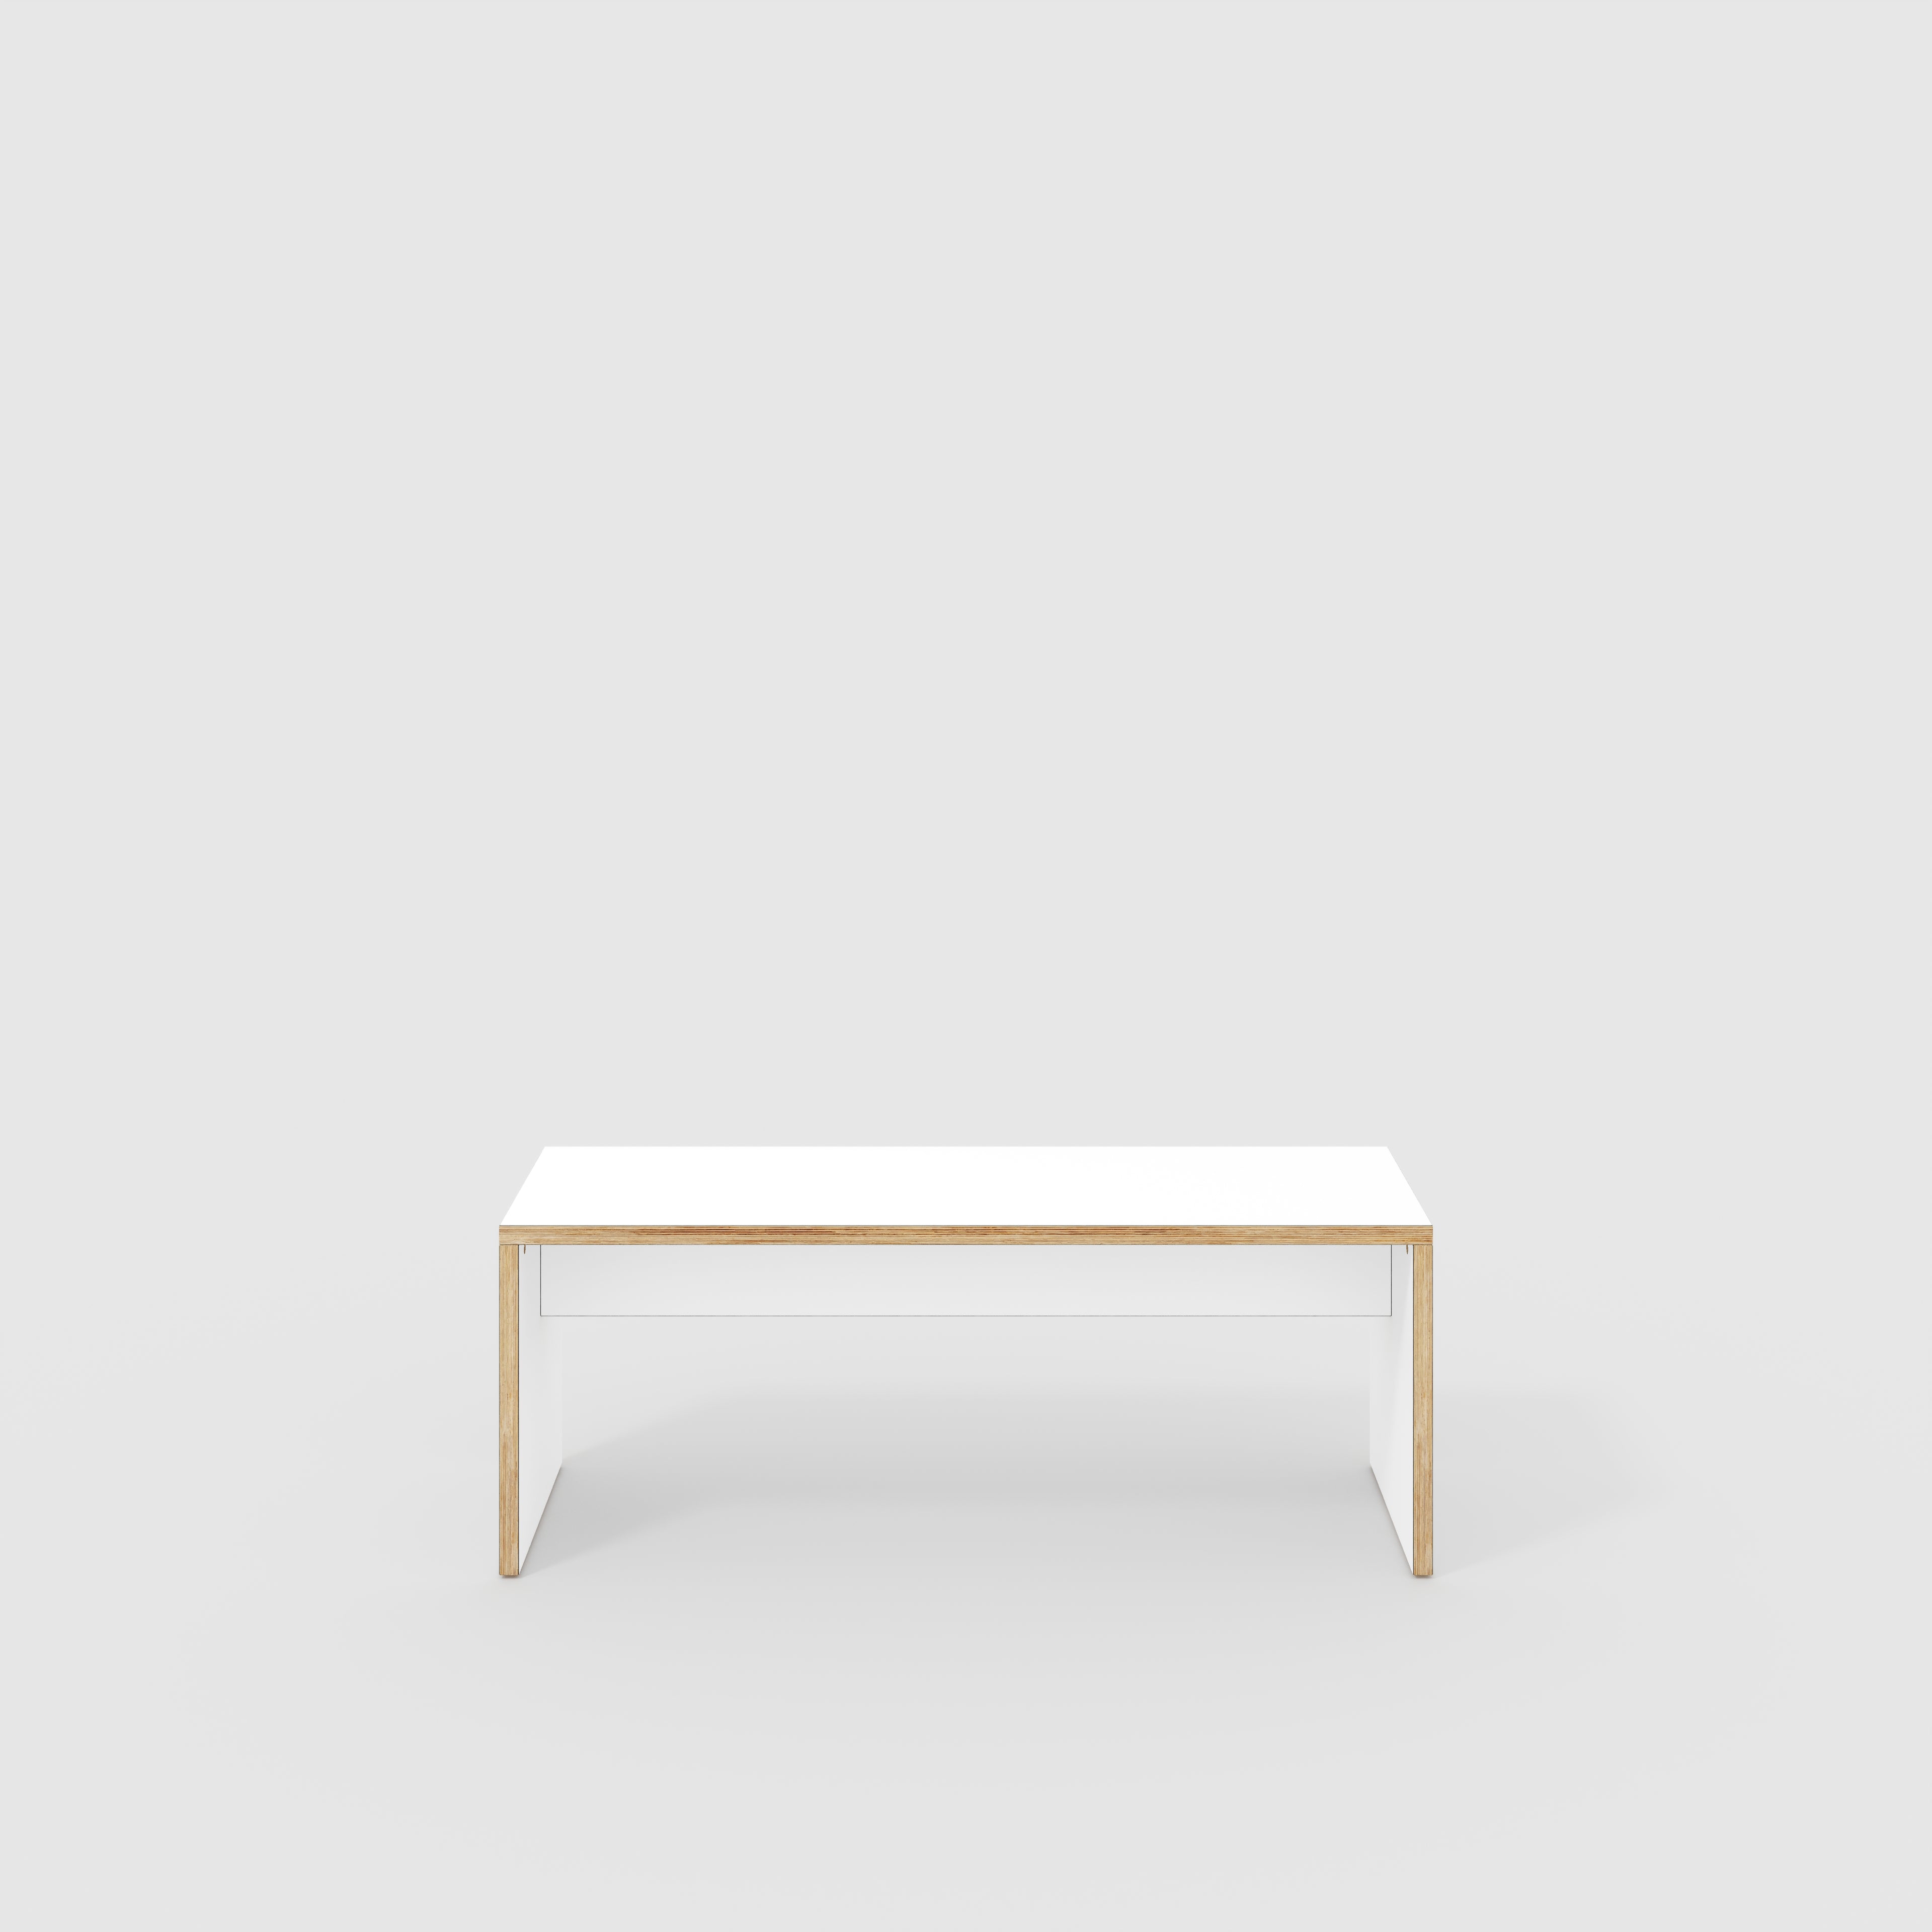 Bench Seat with Solid Sides - Formica White - 1200(w) x 400(d)